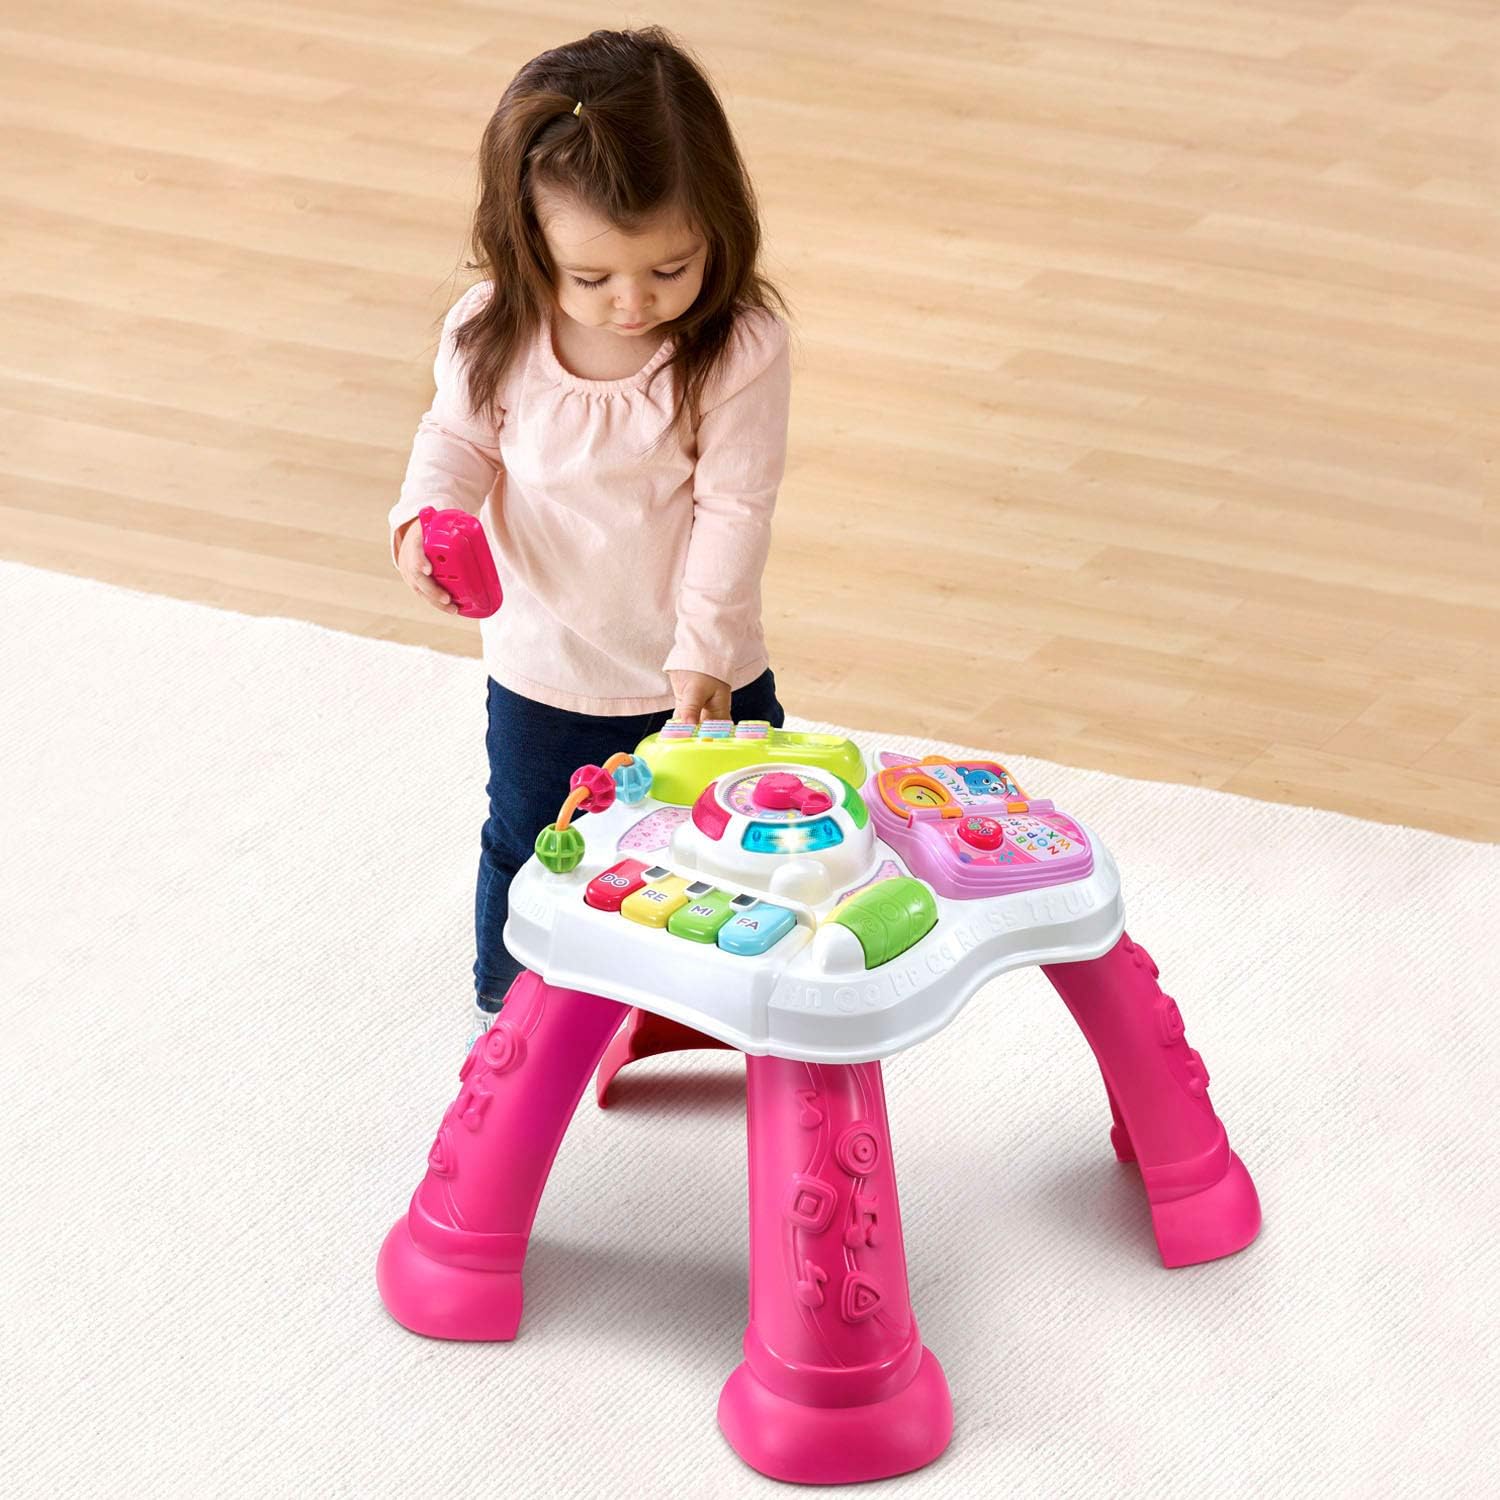 Vtech - Play & Learn Activity Table (Pink)